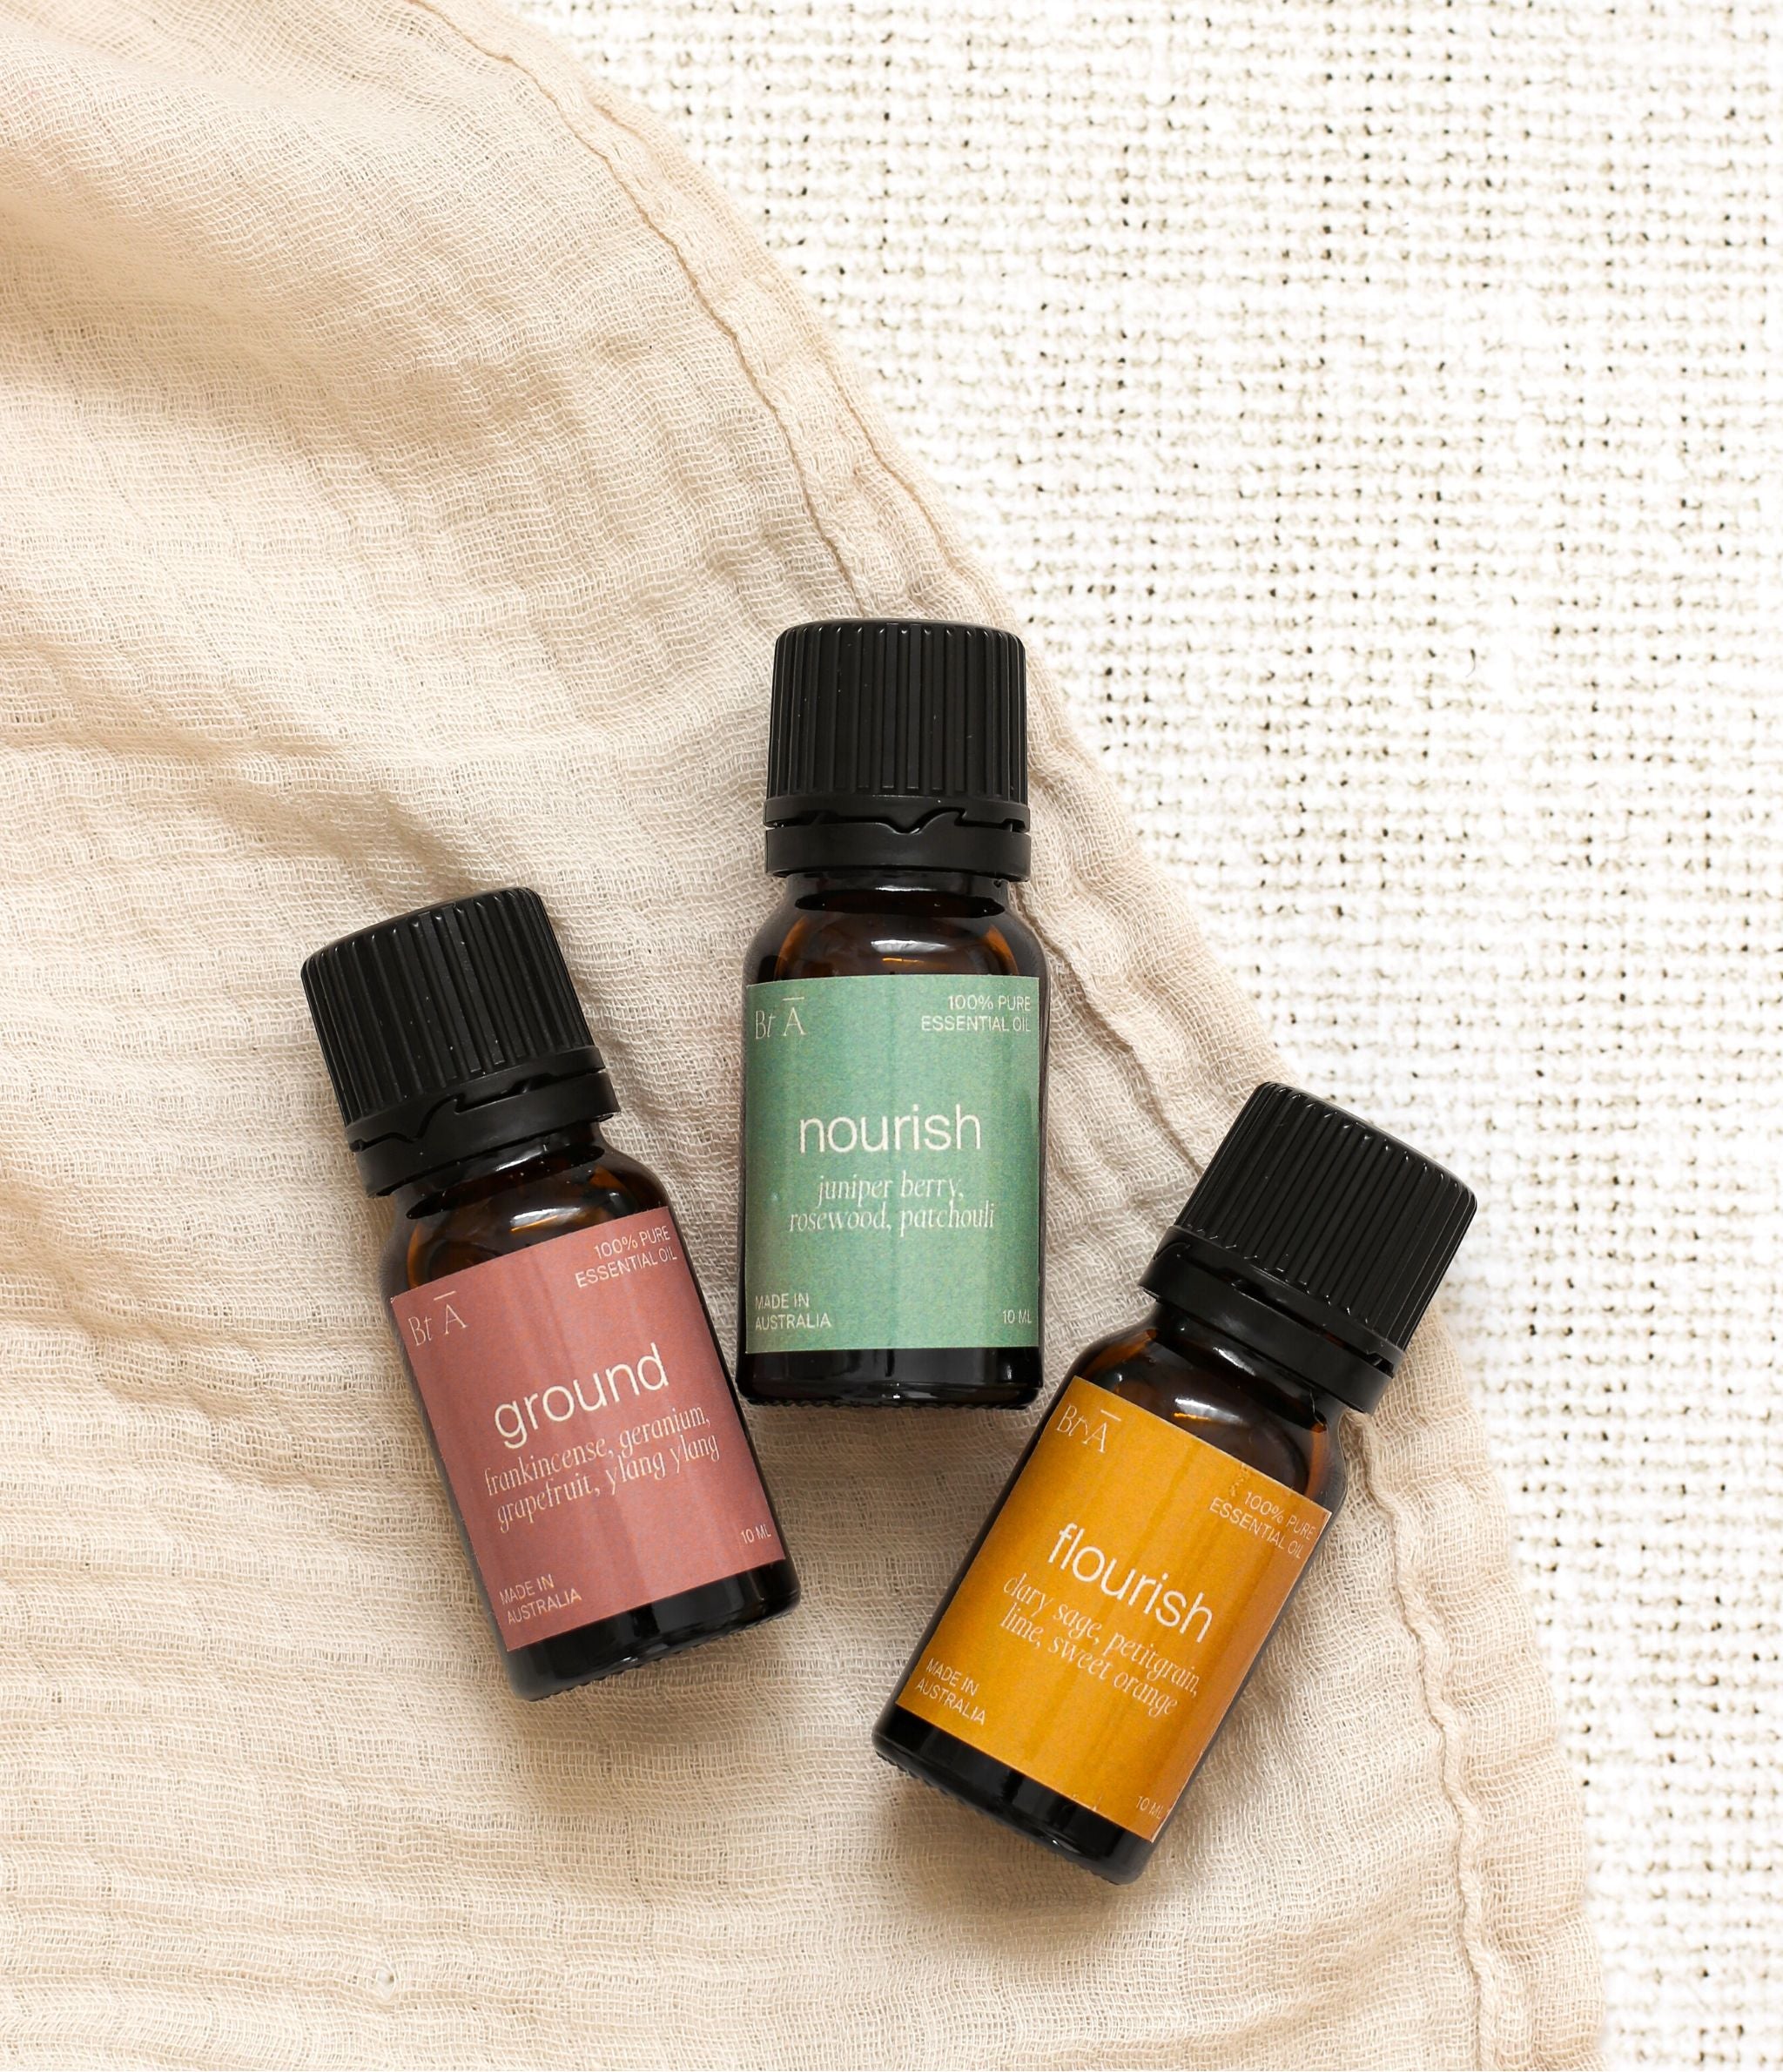 Ground Pure Essential Oil Collection